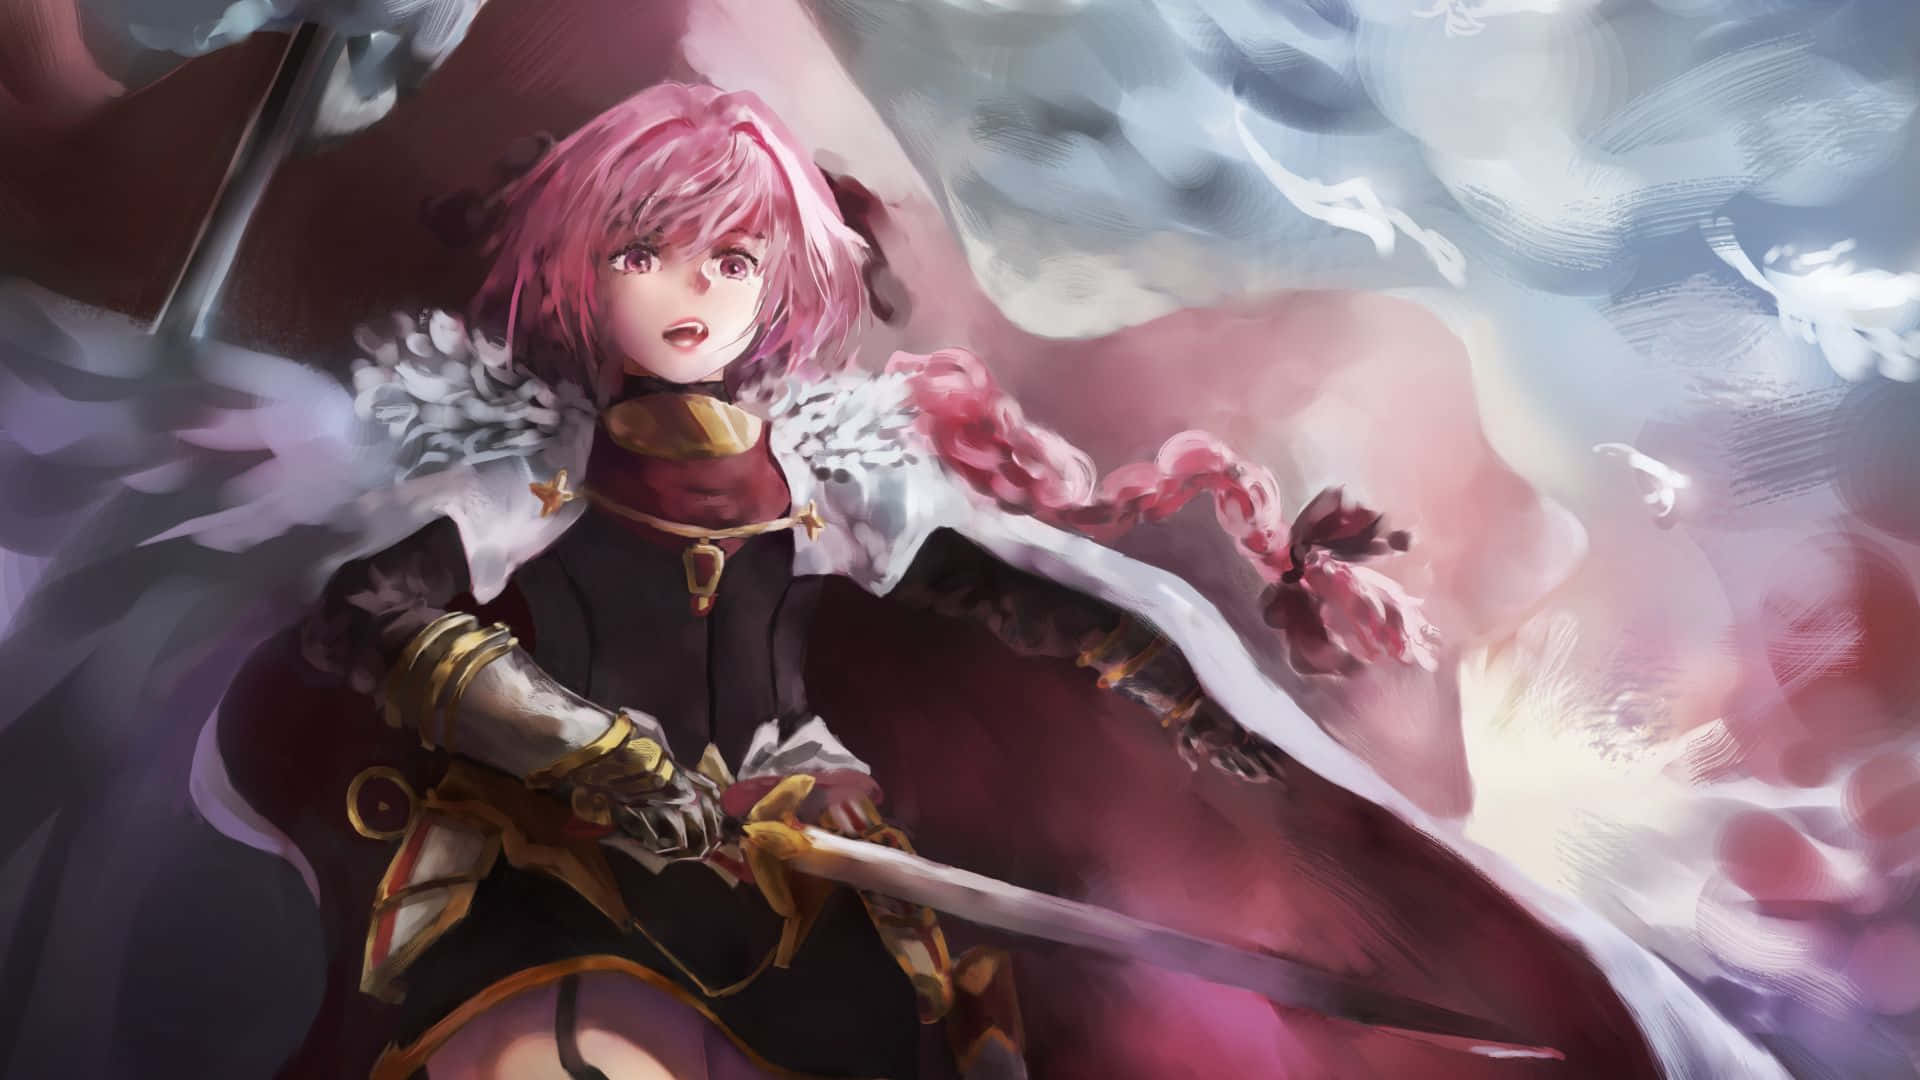 "Cool, collected, and ready for anything; Astolfo never backs down from a challenge."